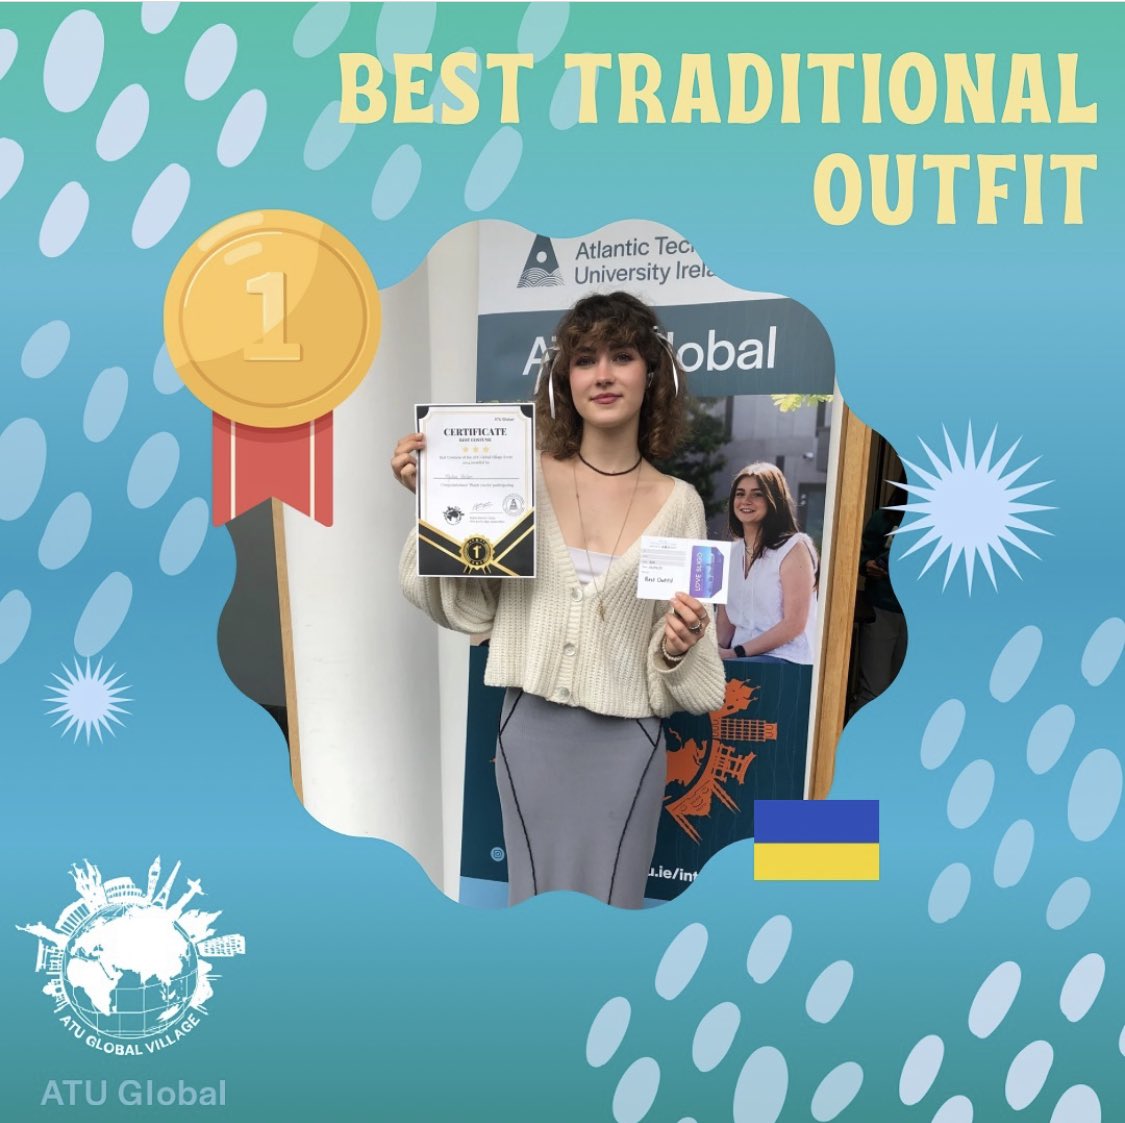 Congratulations to our winner of the Best Traditional Outfit competition @atu_ie Global Village Event held @atusligo_ie 📆 April 16th last. 🥇 Ukraine 🇺🇦👏 #ATUGlobalVillage #ATUCultureWeek